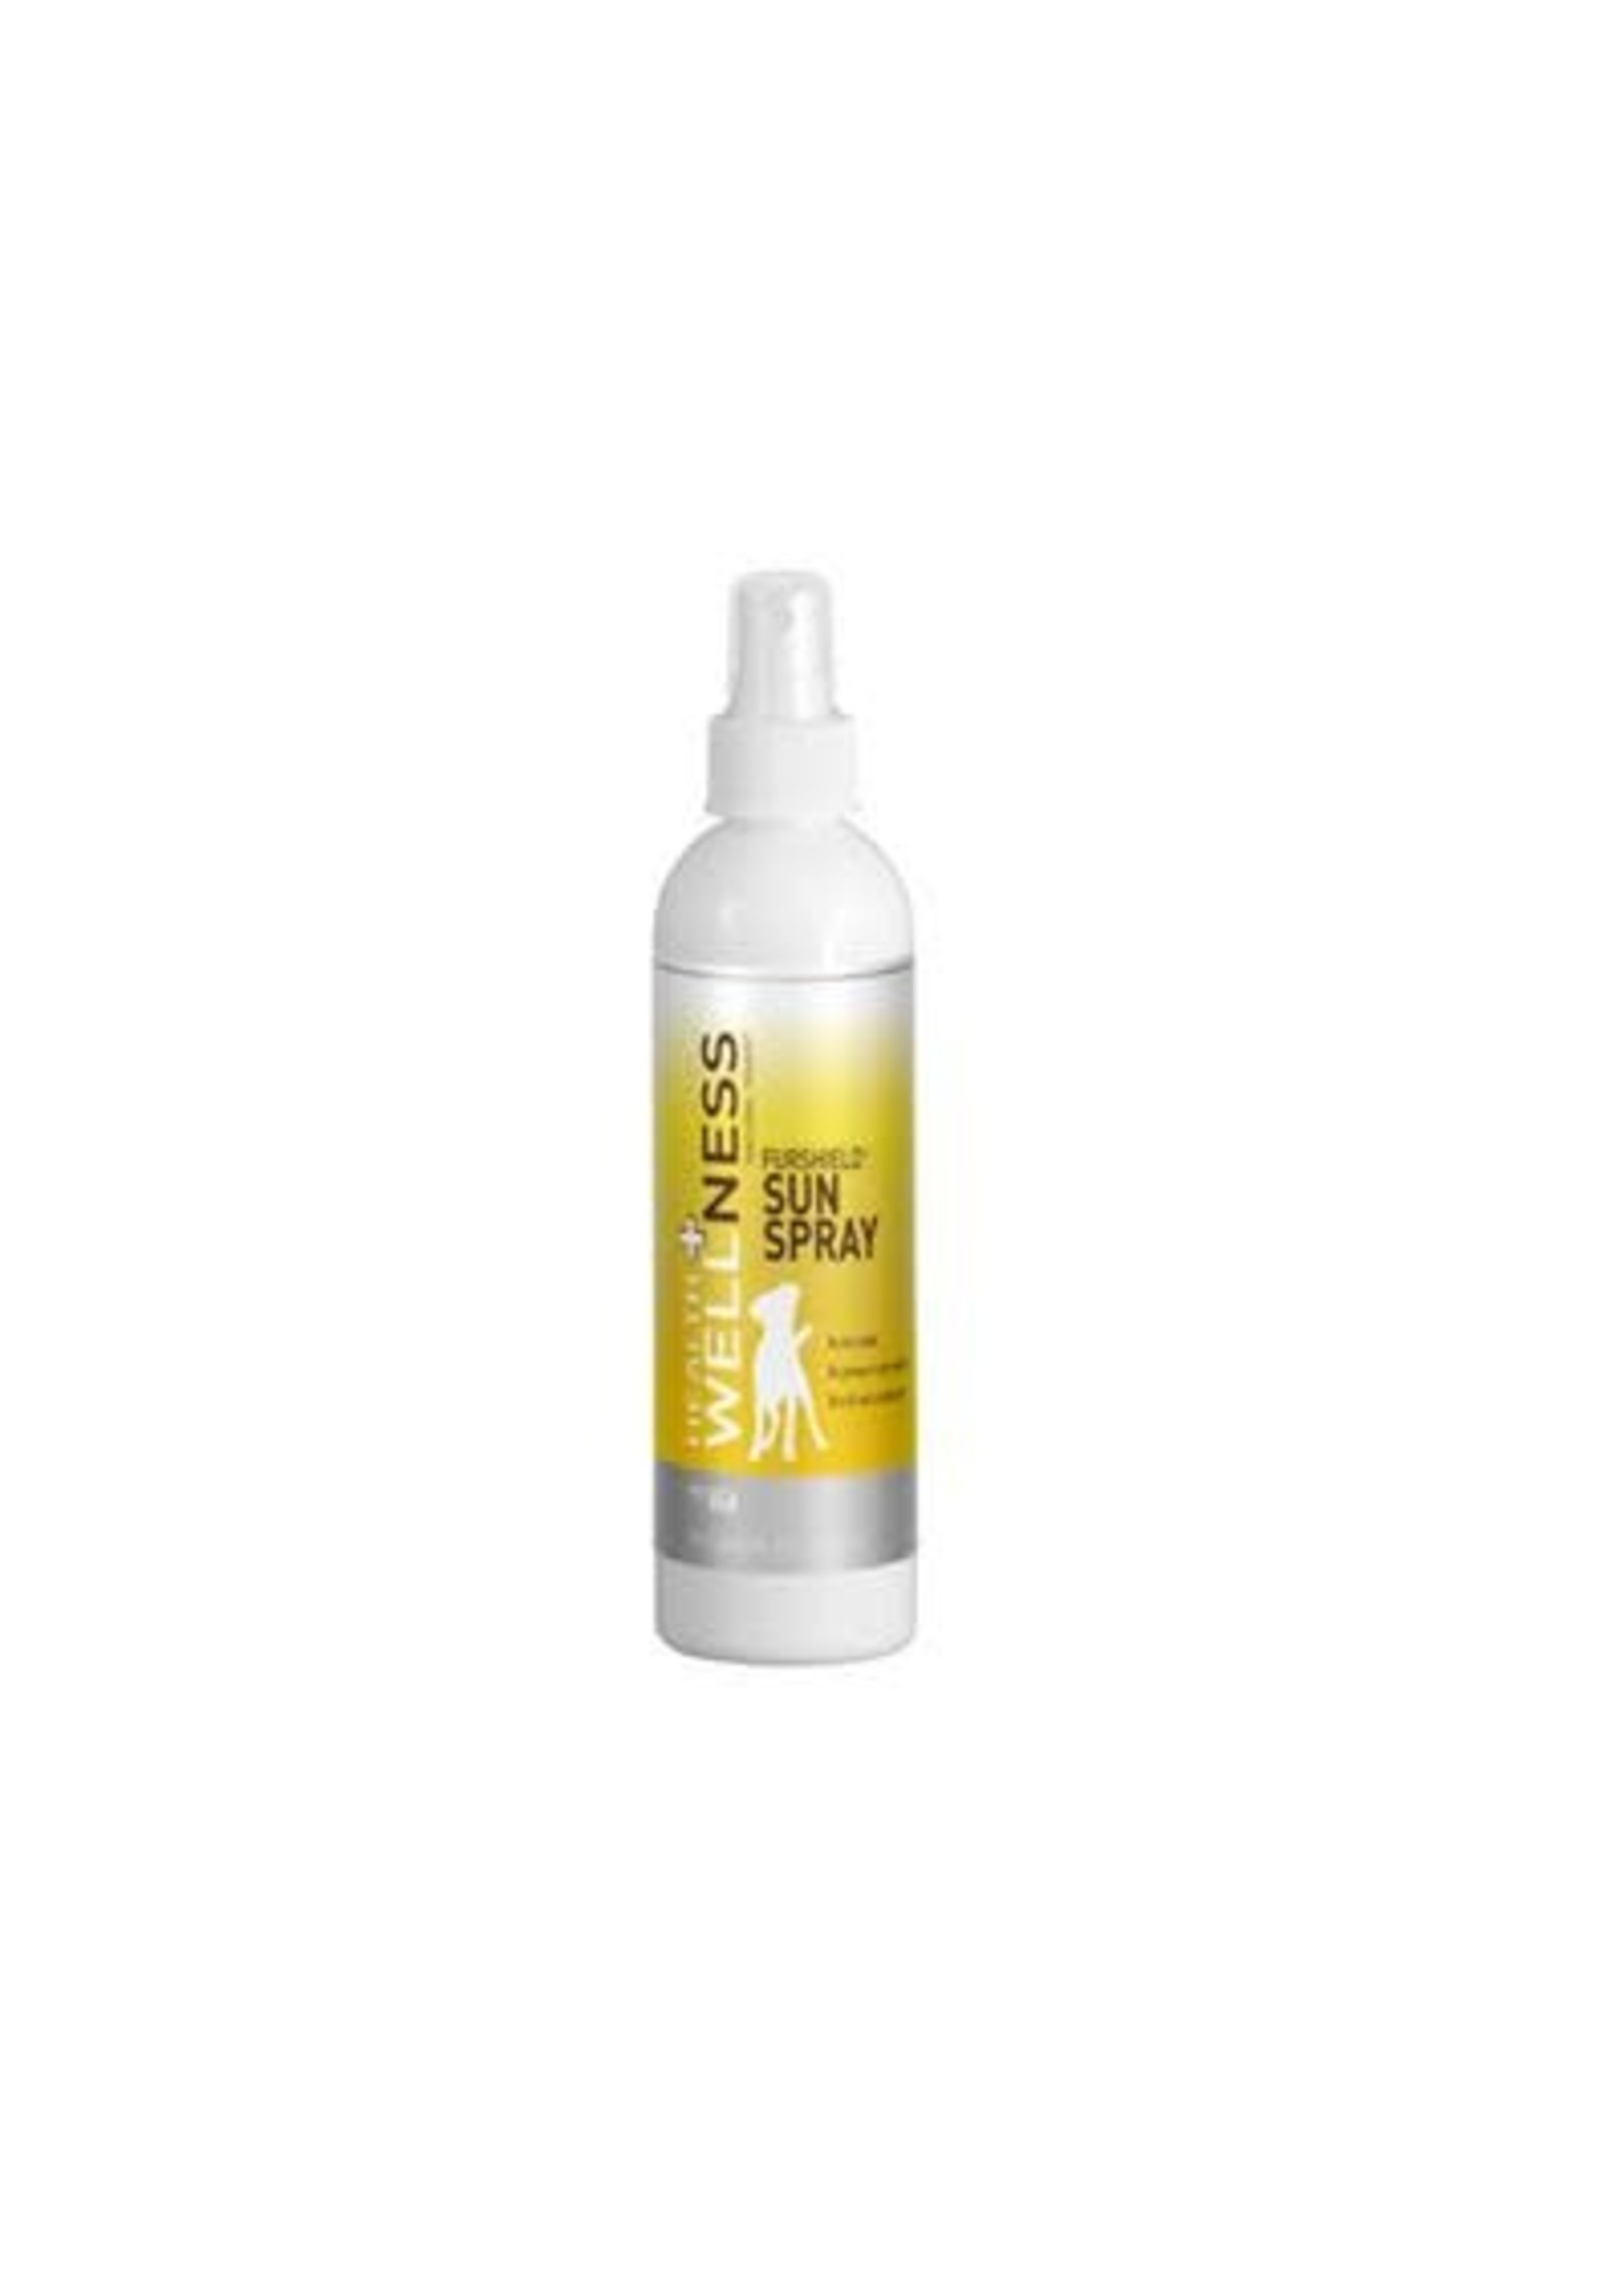 Natural Touch Natural Touch - Furshield Sun Spray